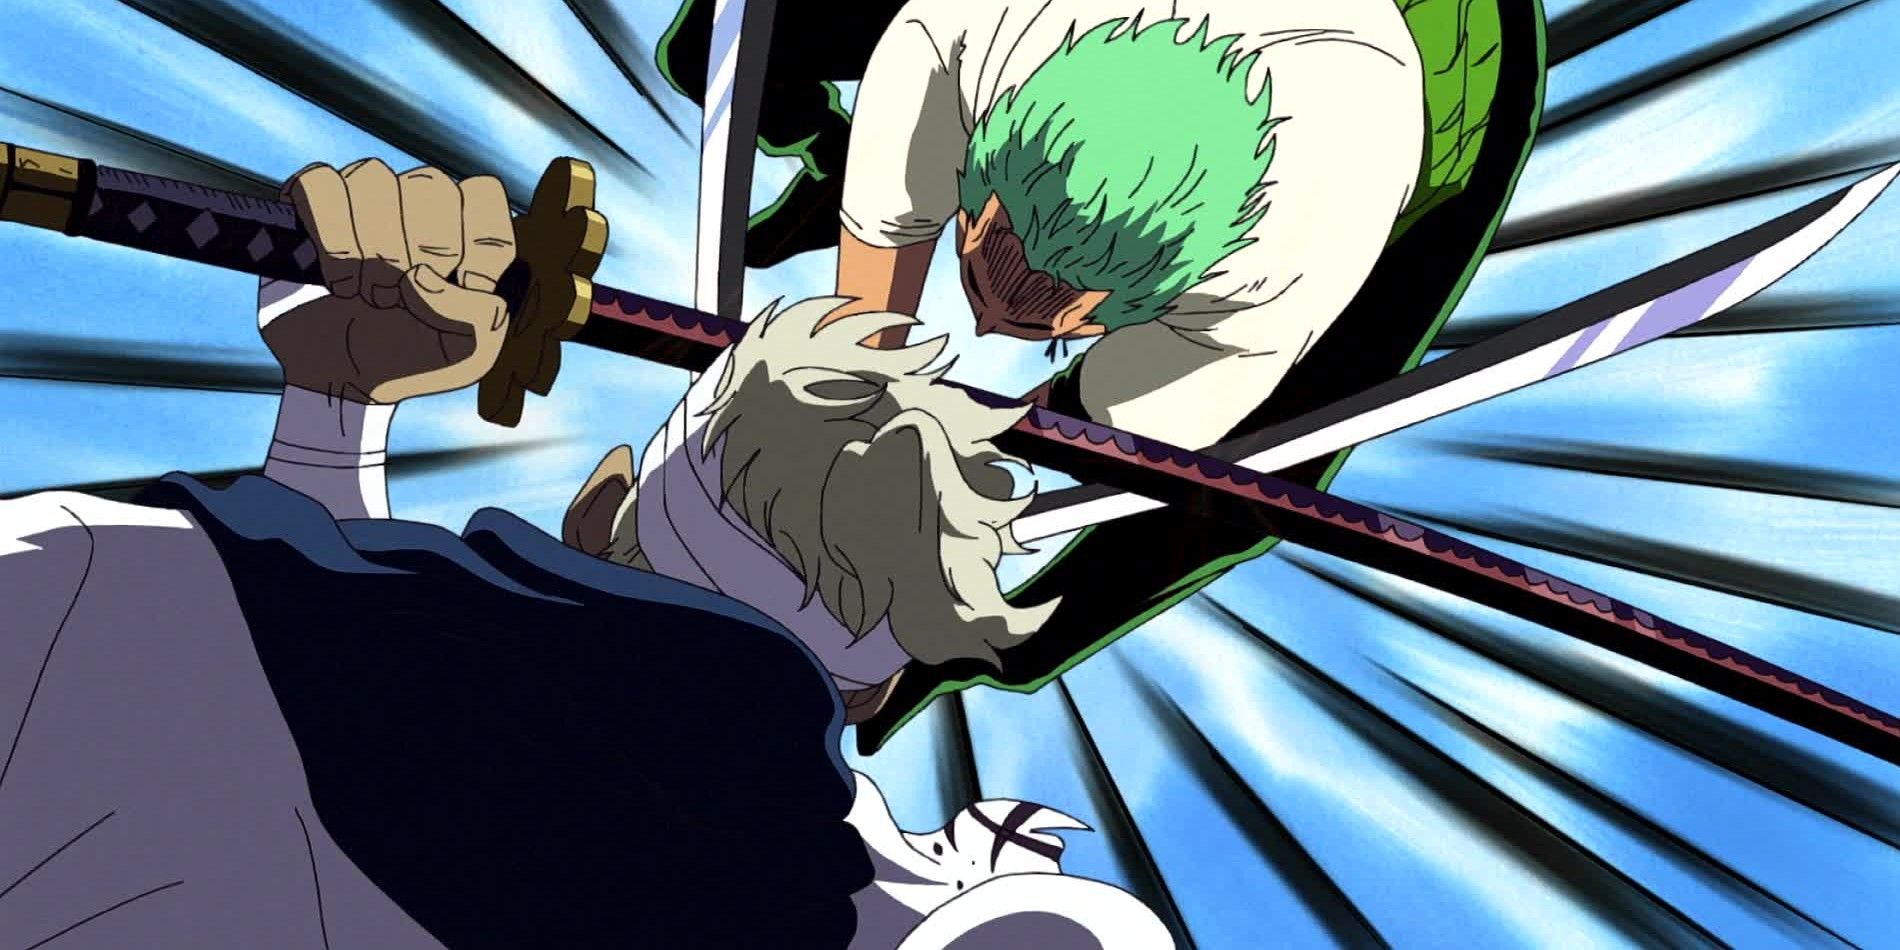 Undead Ryuma clashes with Zoro in One Piece